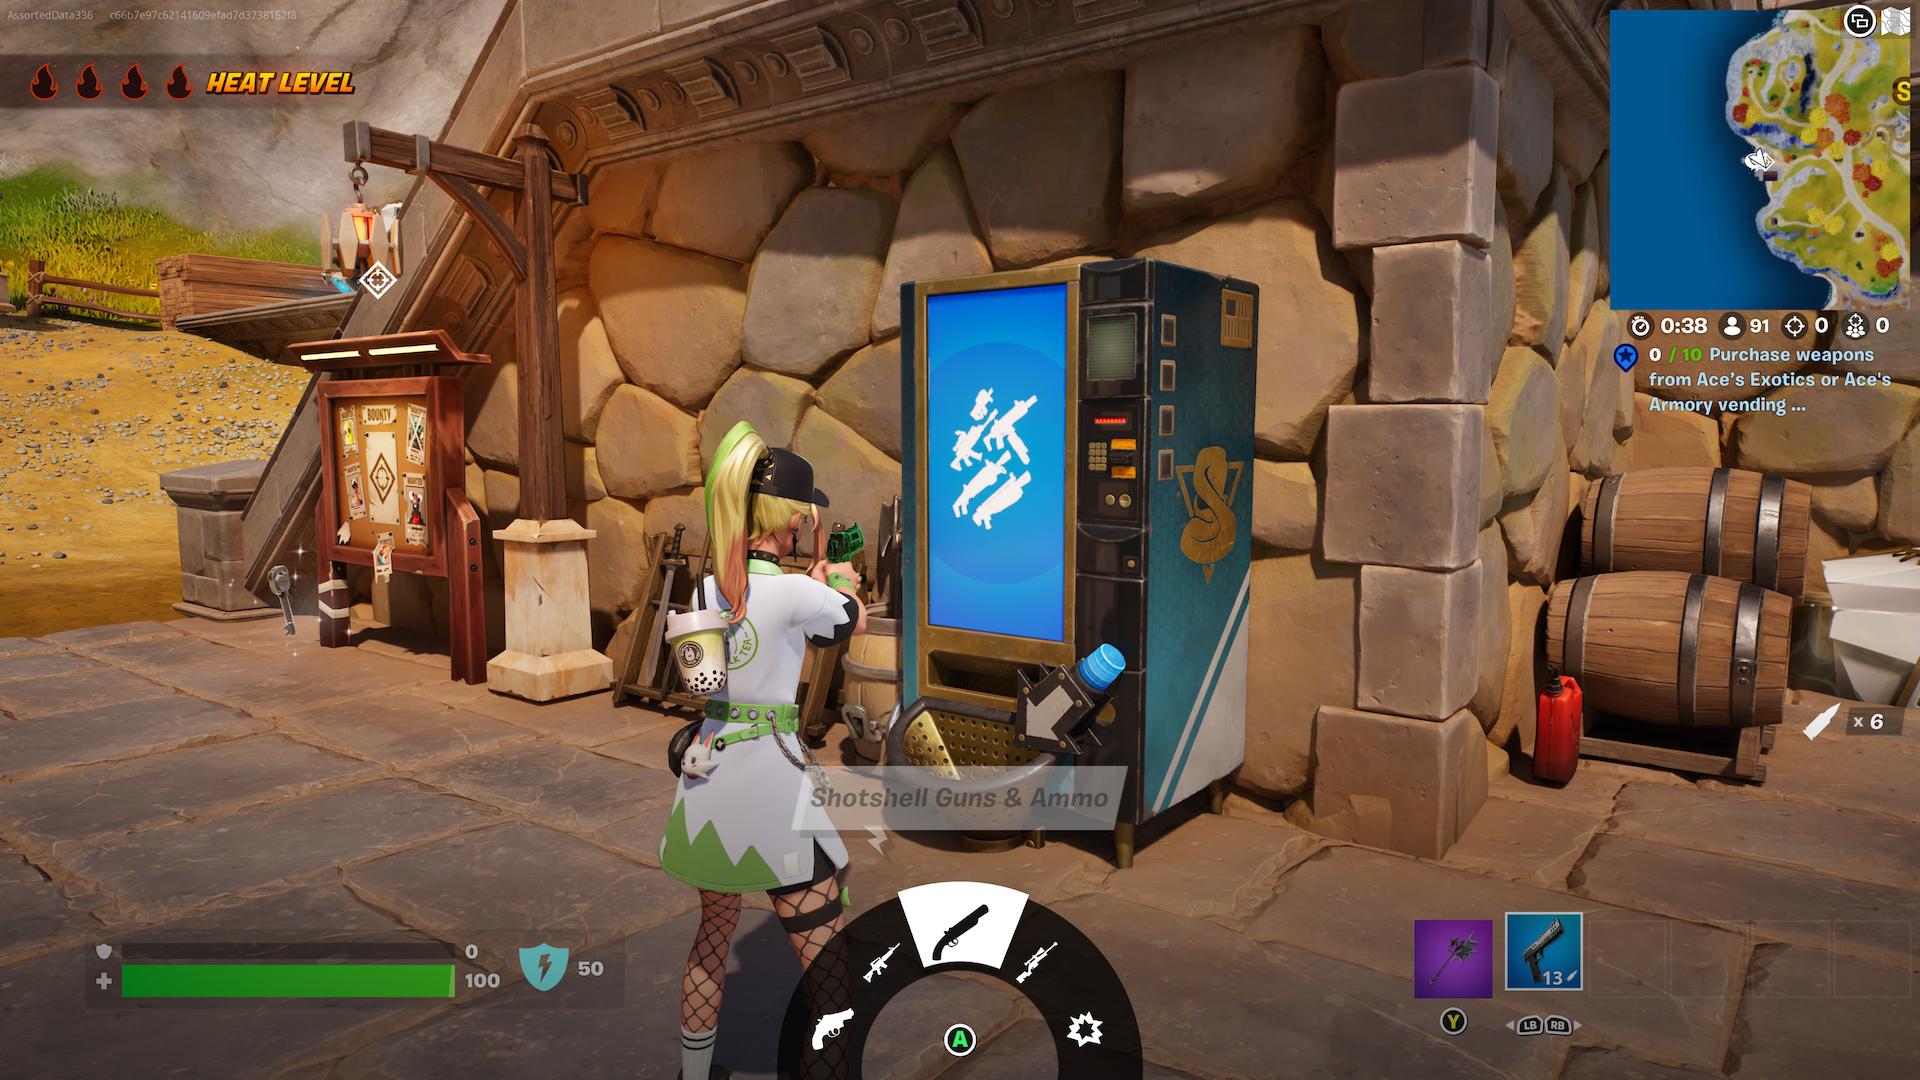 Where to find Ace's Exotics and Ace's Armory vending machines in Fortnite